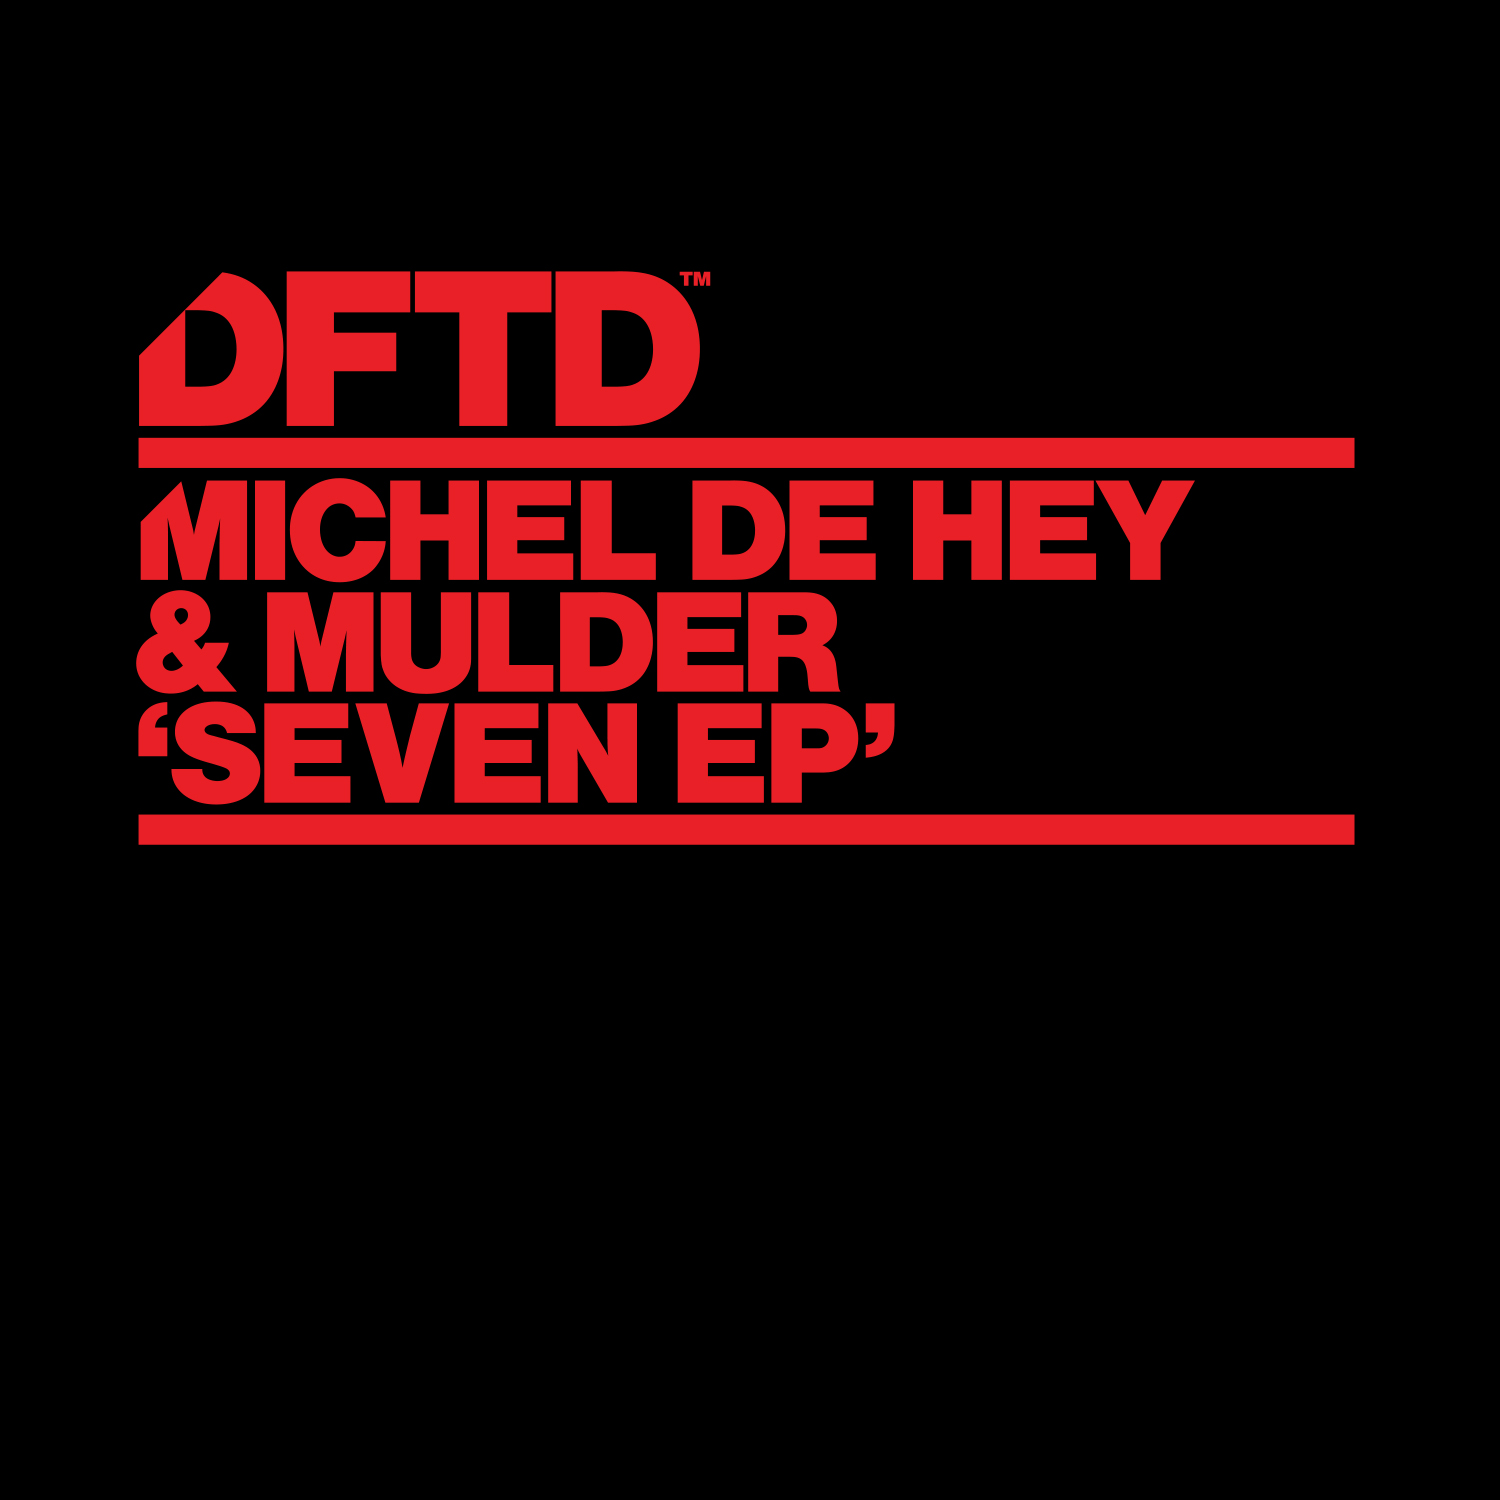 Michel De Hey & Mulder Seven EP Defected Records™ House Music All Life Long